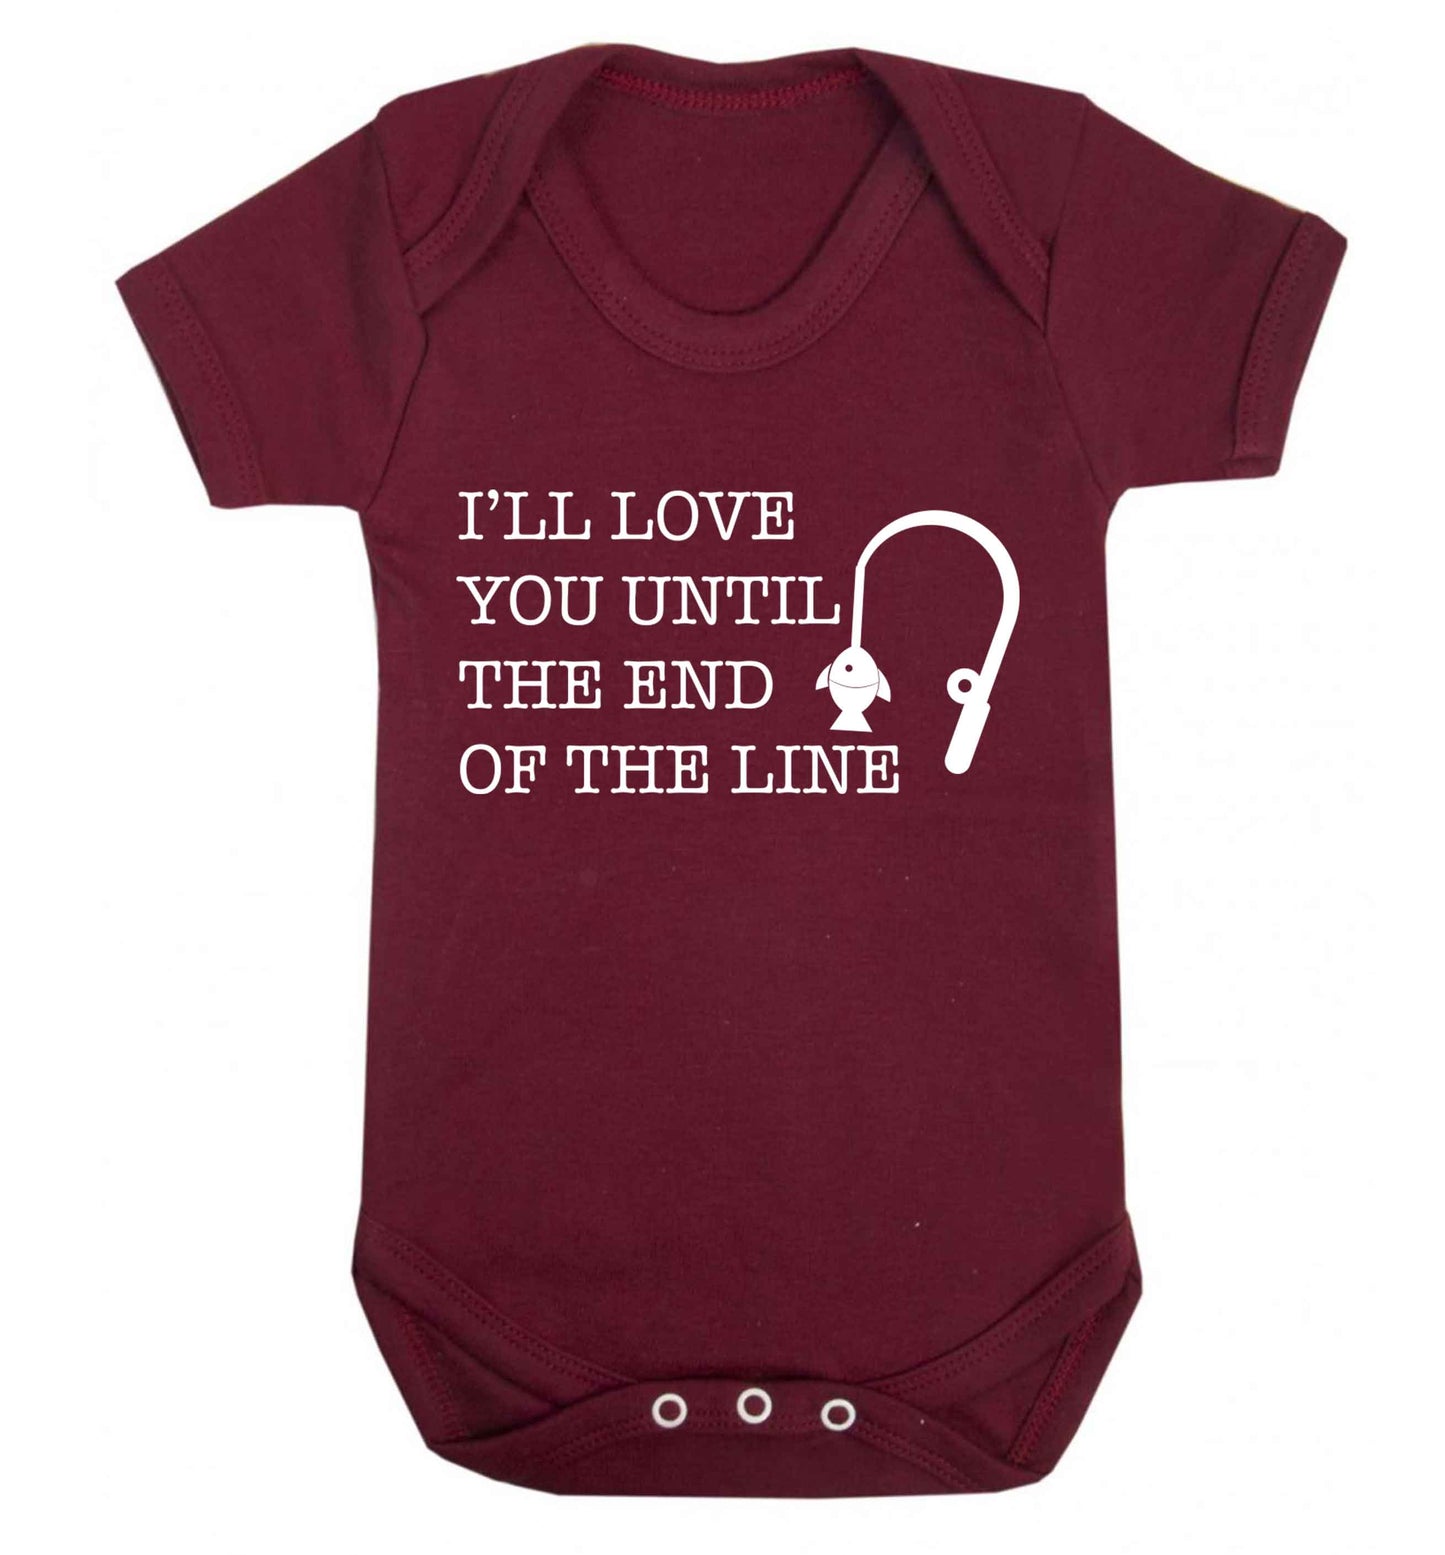 I'll love you until the end of the line Baby Vest maroon 18-24 months